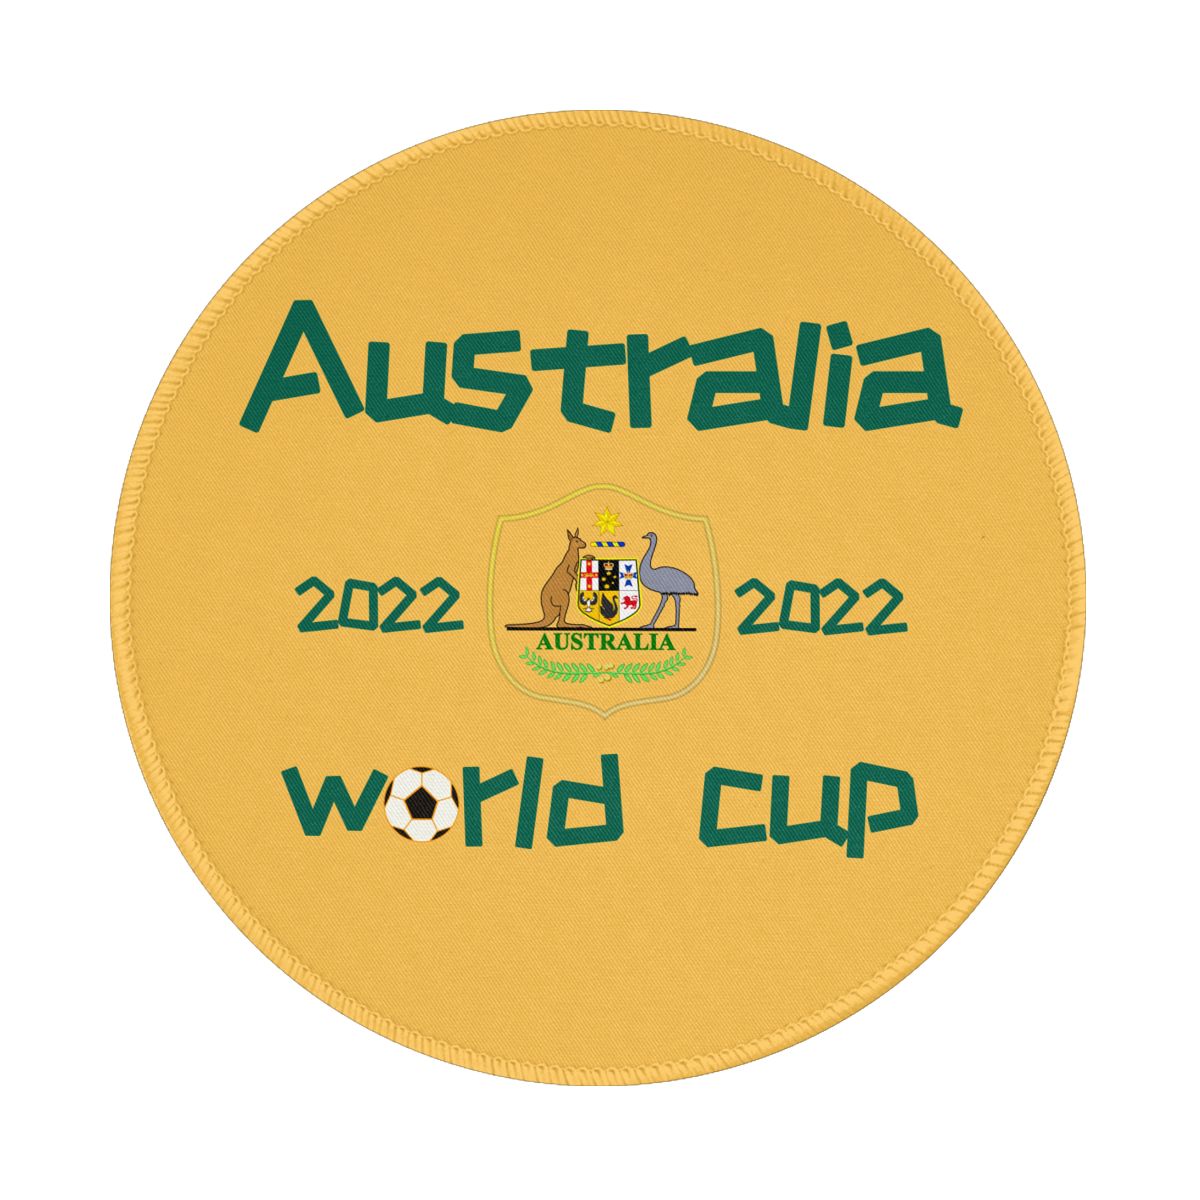 Australia 2022 World Cup Team Logo Waterproof Round Mouse Pad for Wireless Mouse